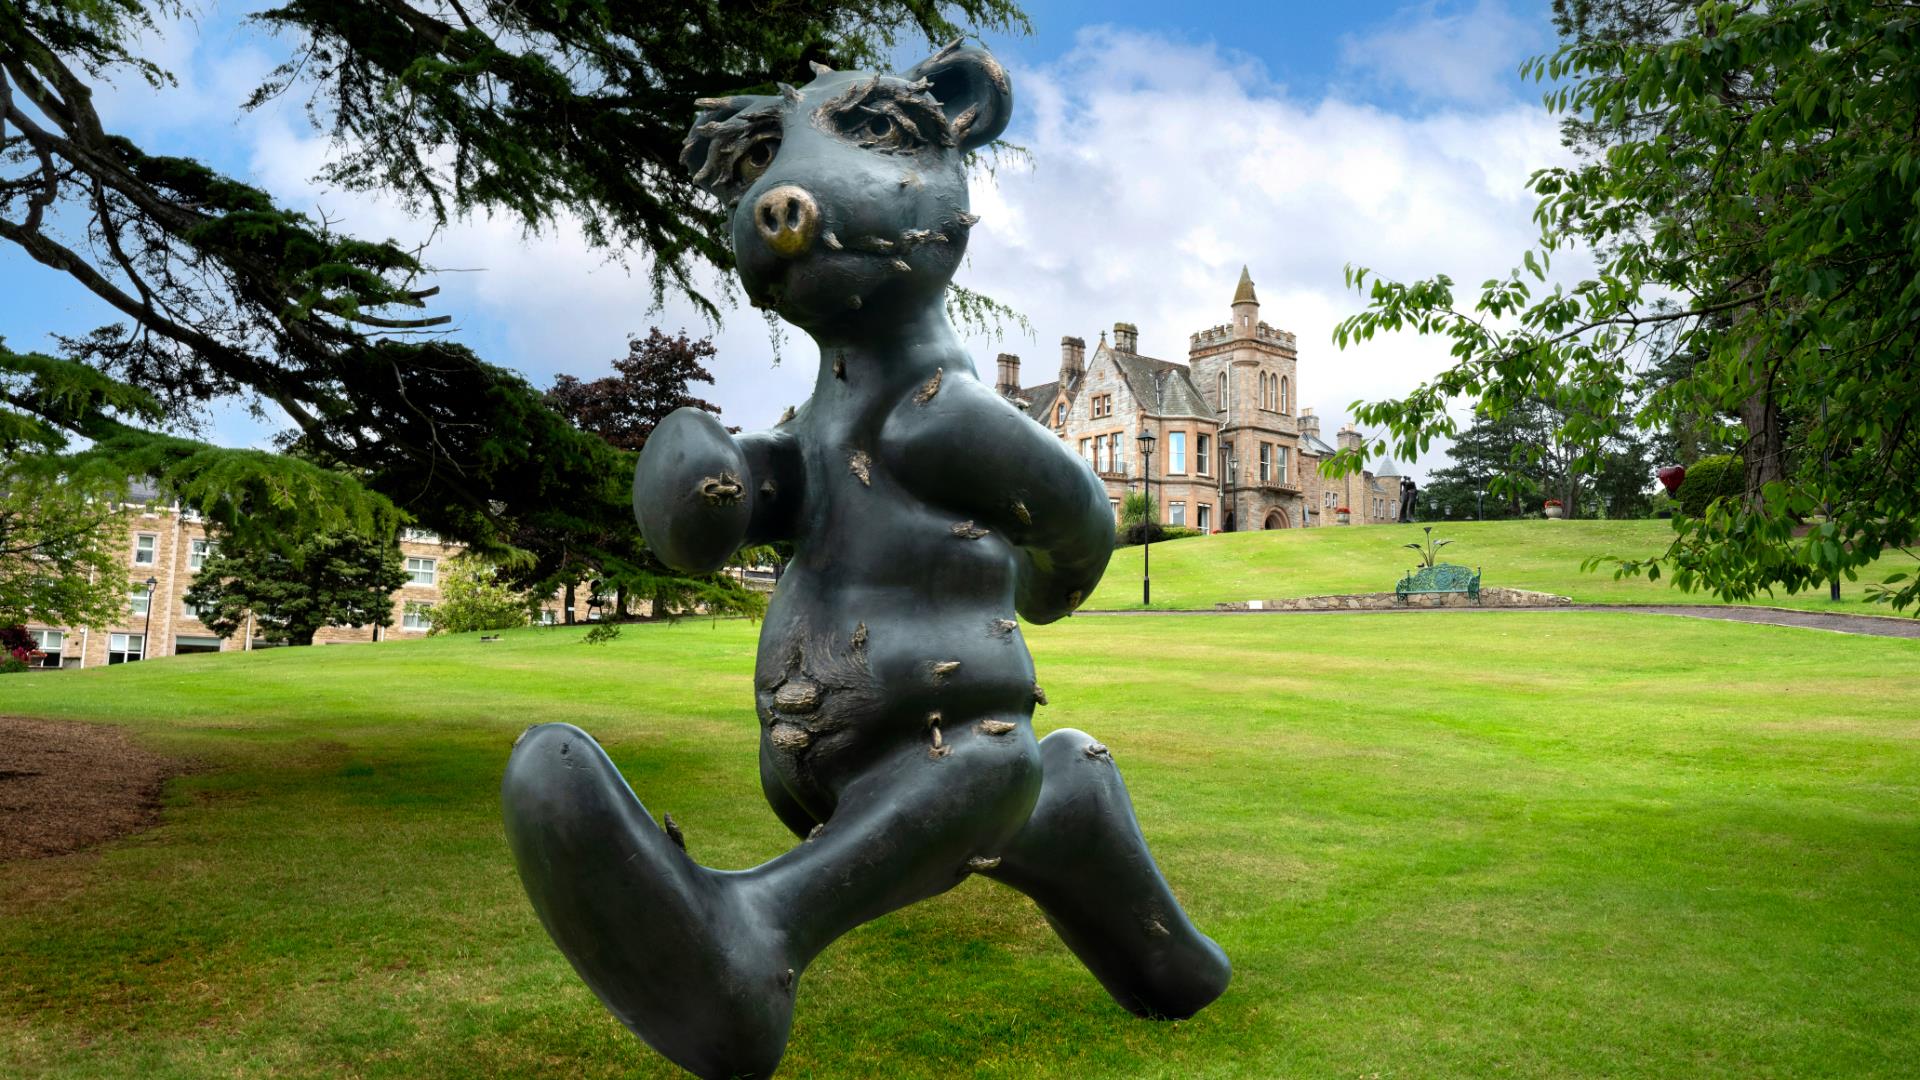 Lost in Reverie Bear bronze sculpture by Patrick O'Reilly in the grounds of the Culloden Estate & Spa